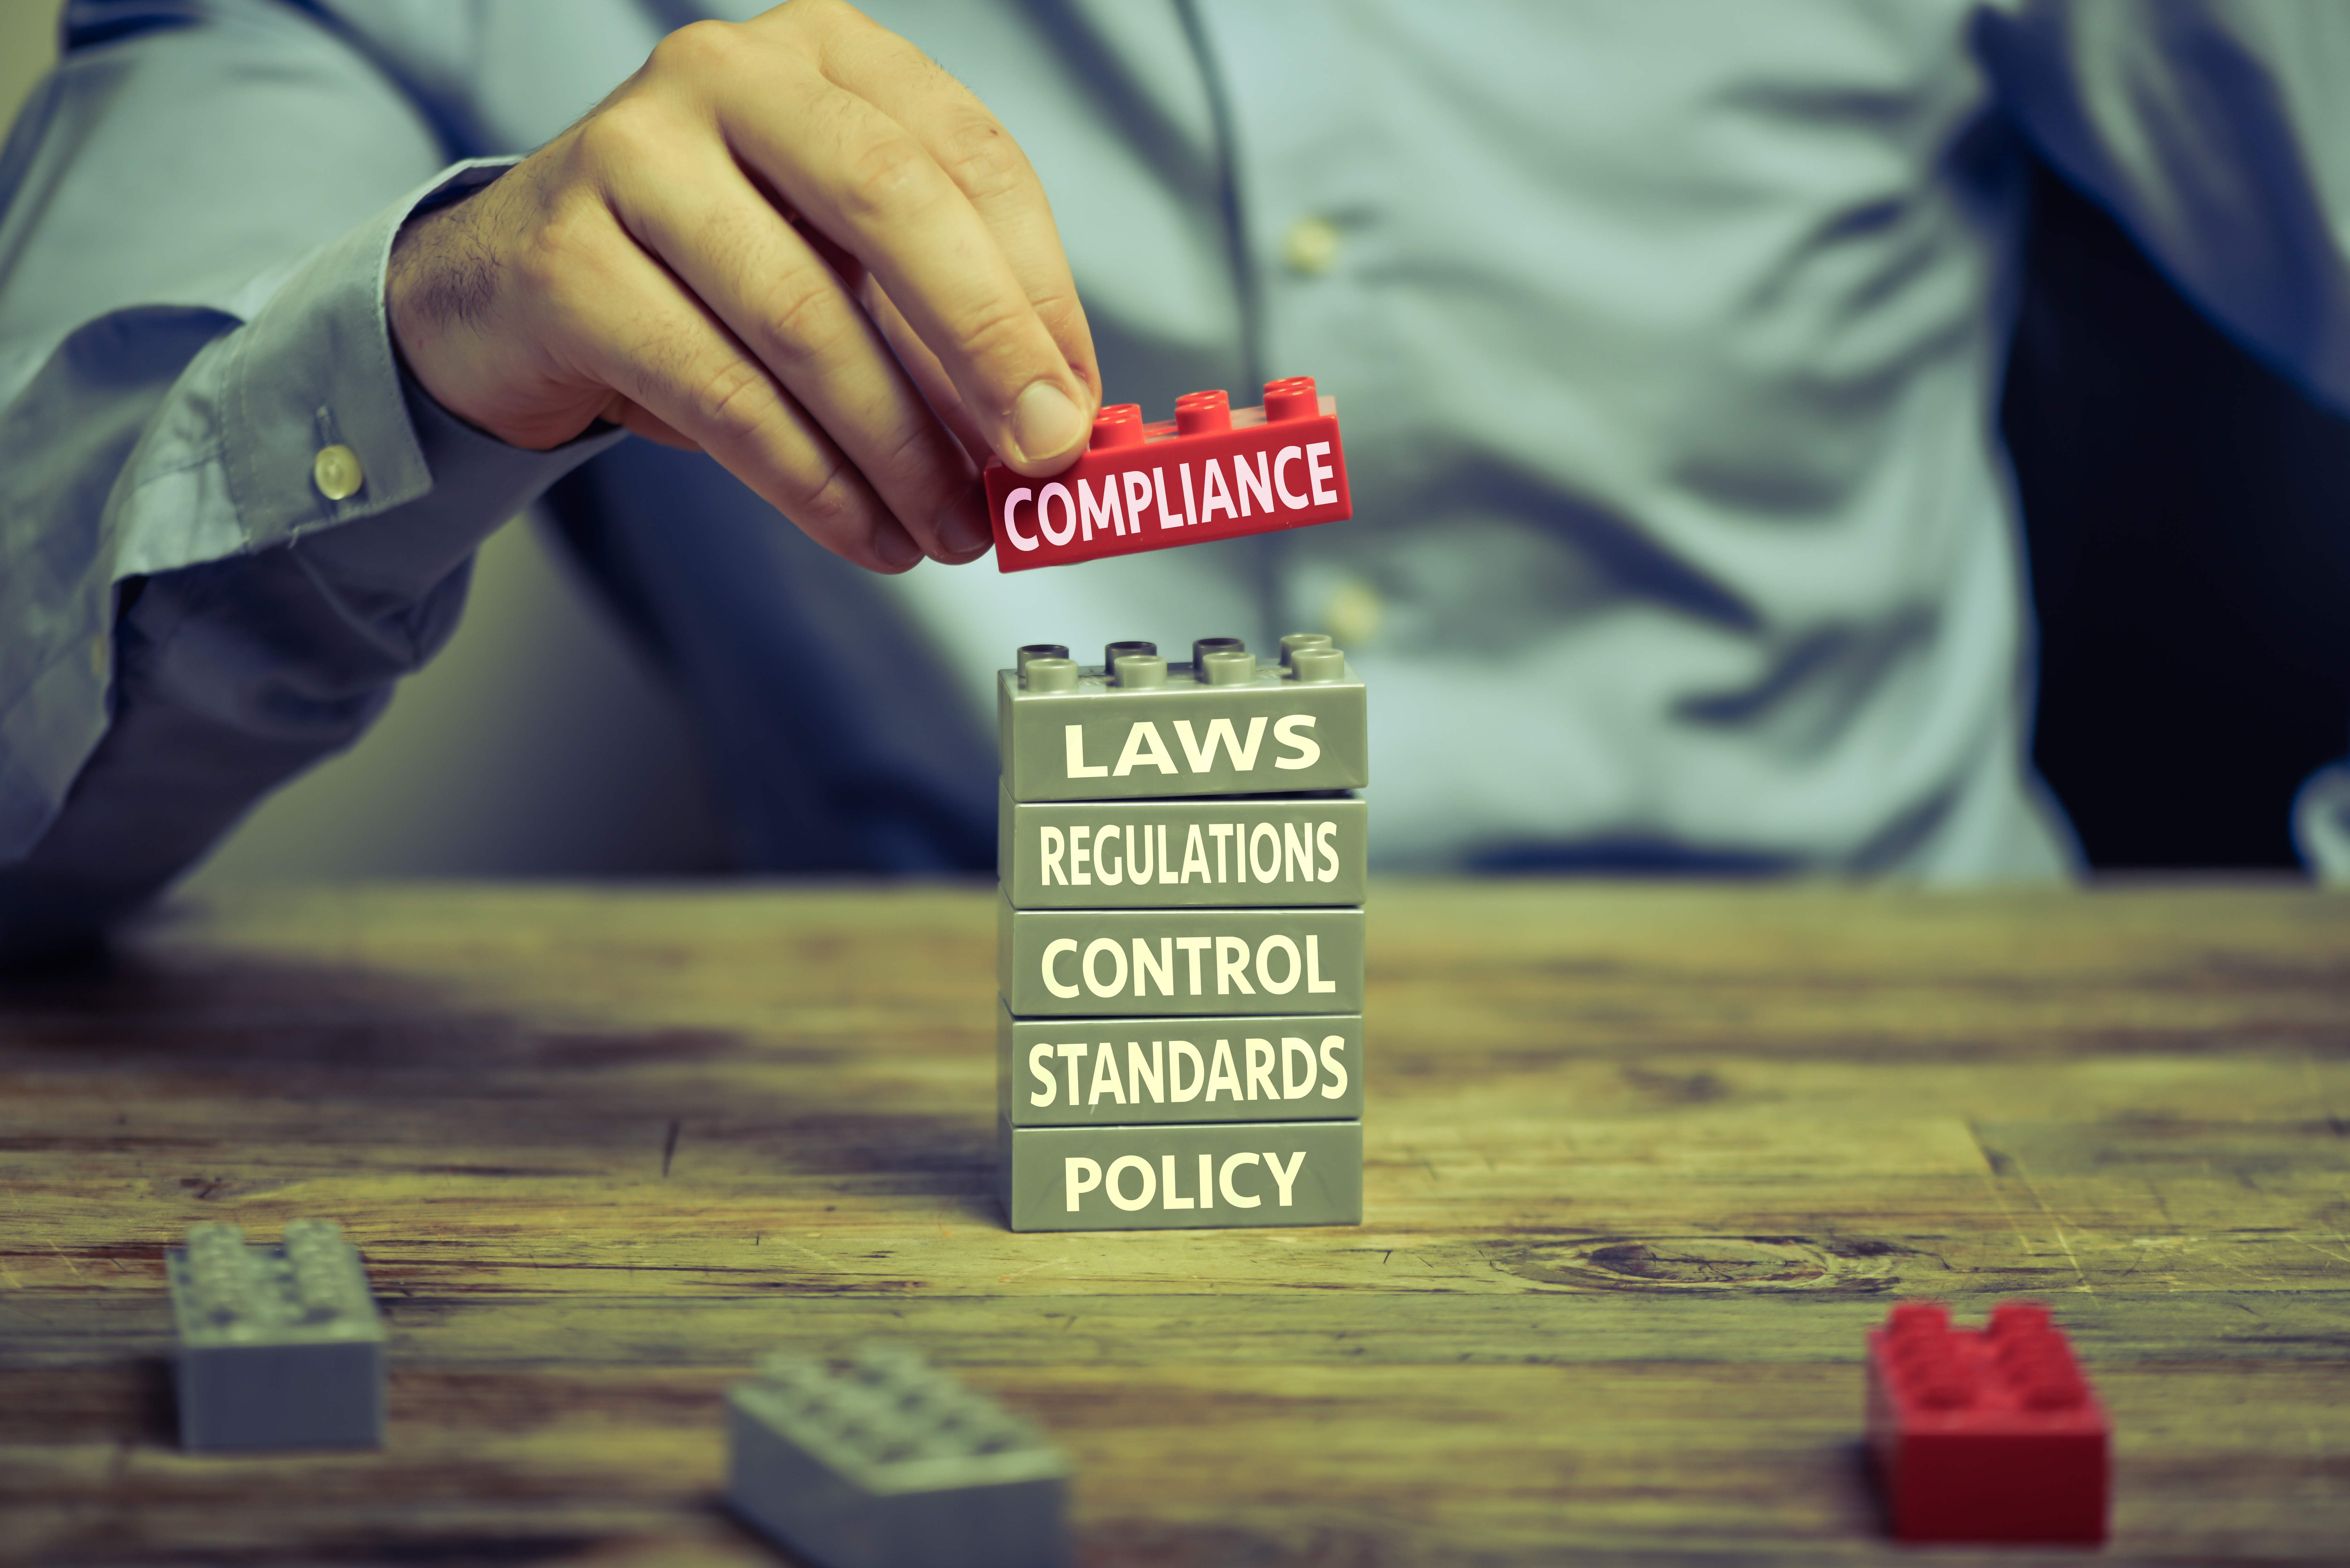 Compliance laws, regulations, control, standards, and policy